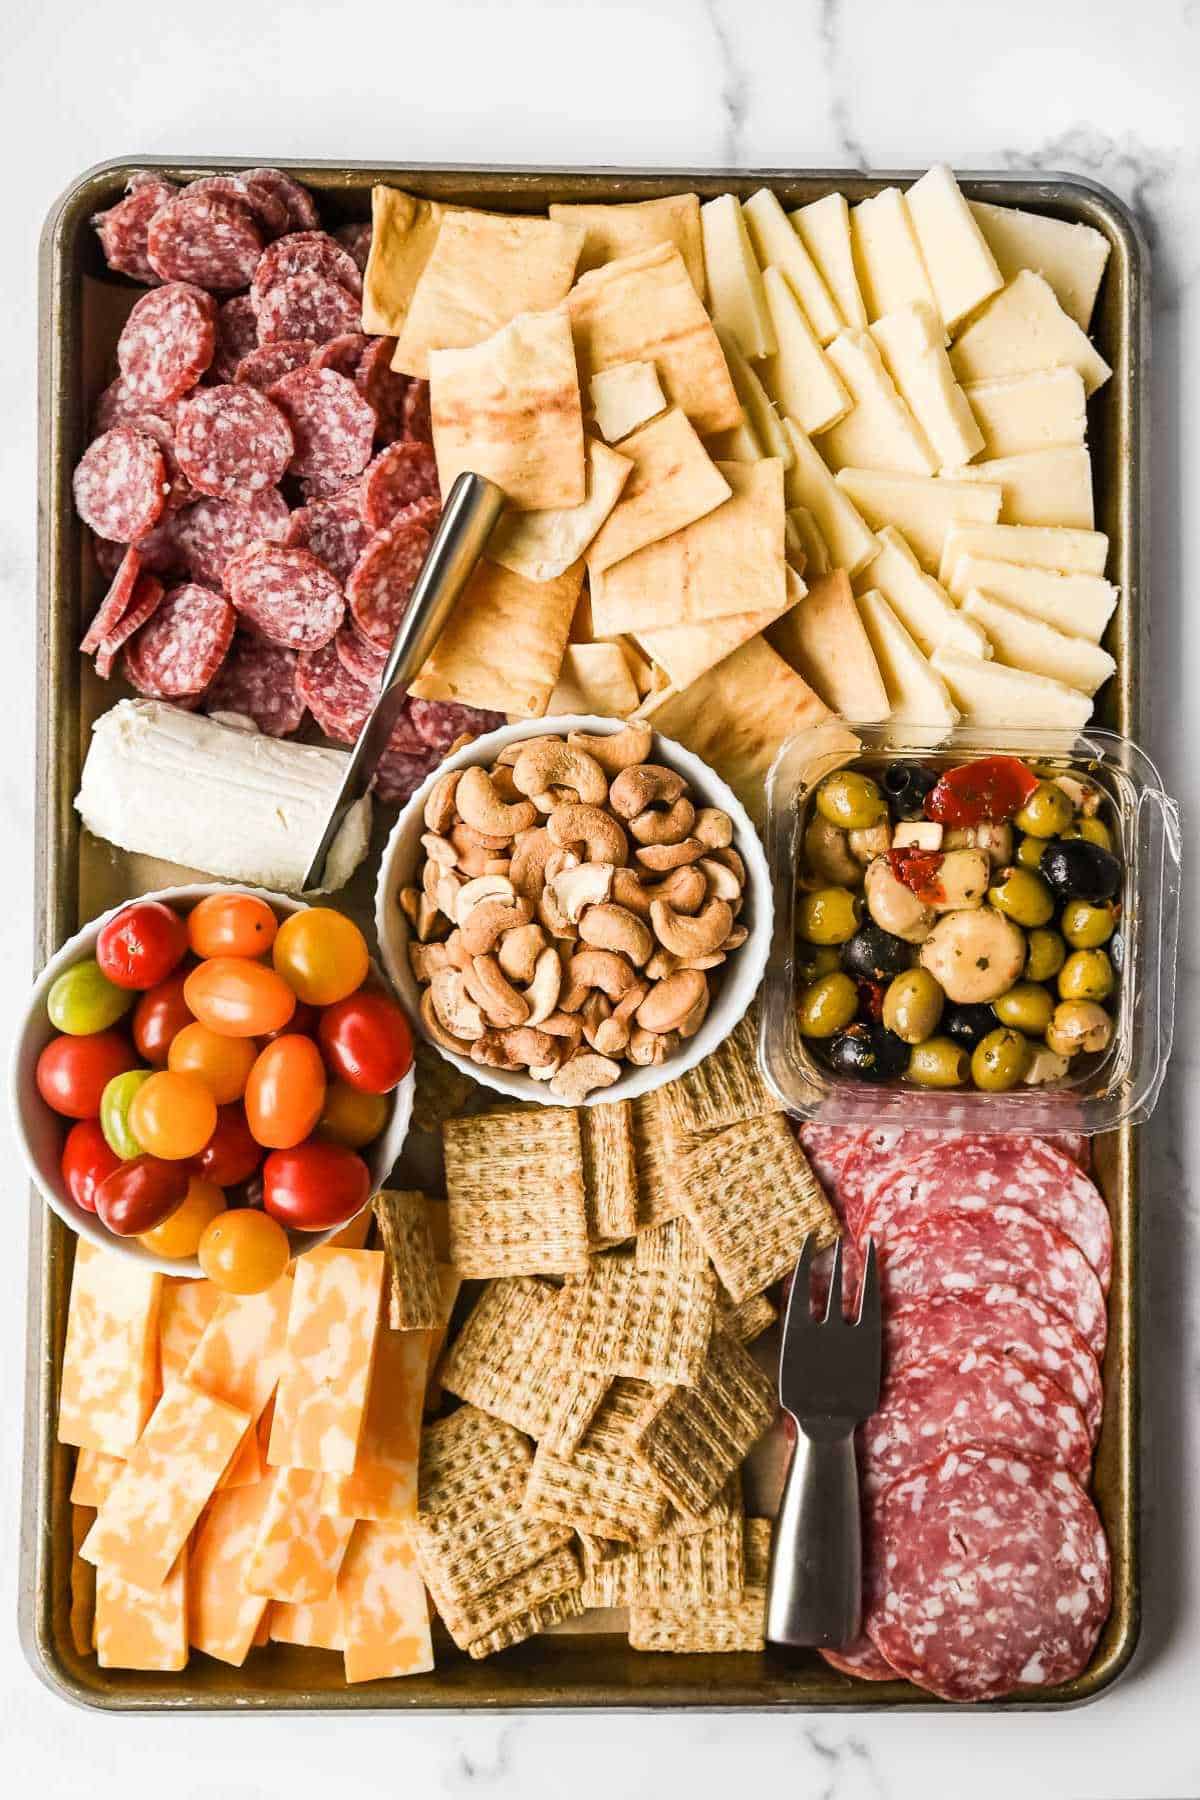 Unleash Your Inner Foodie: 41 Insta-Worthy Charcuterie Board Ideas That Will Make Your Guests Drool 9